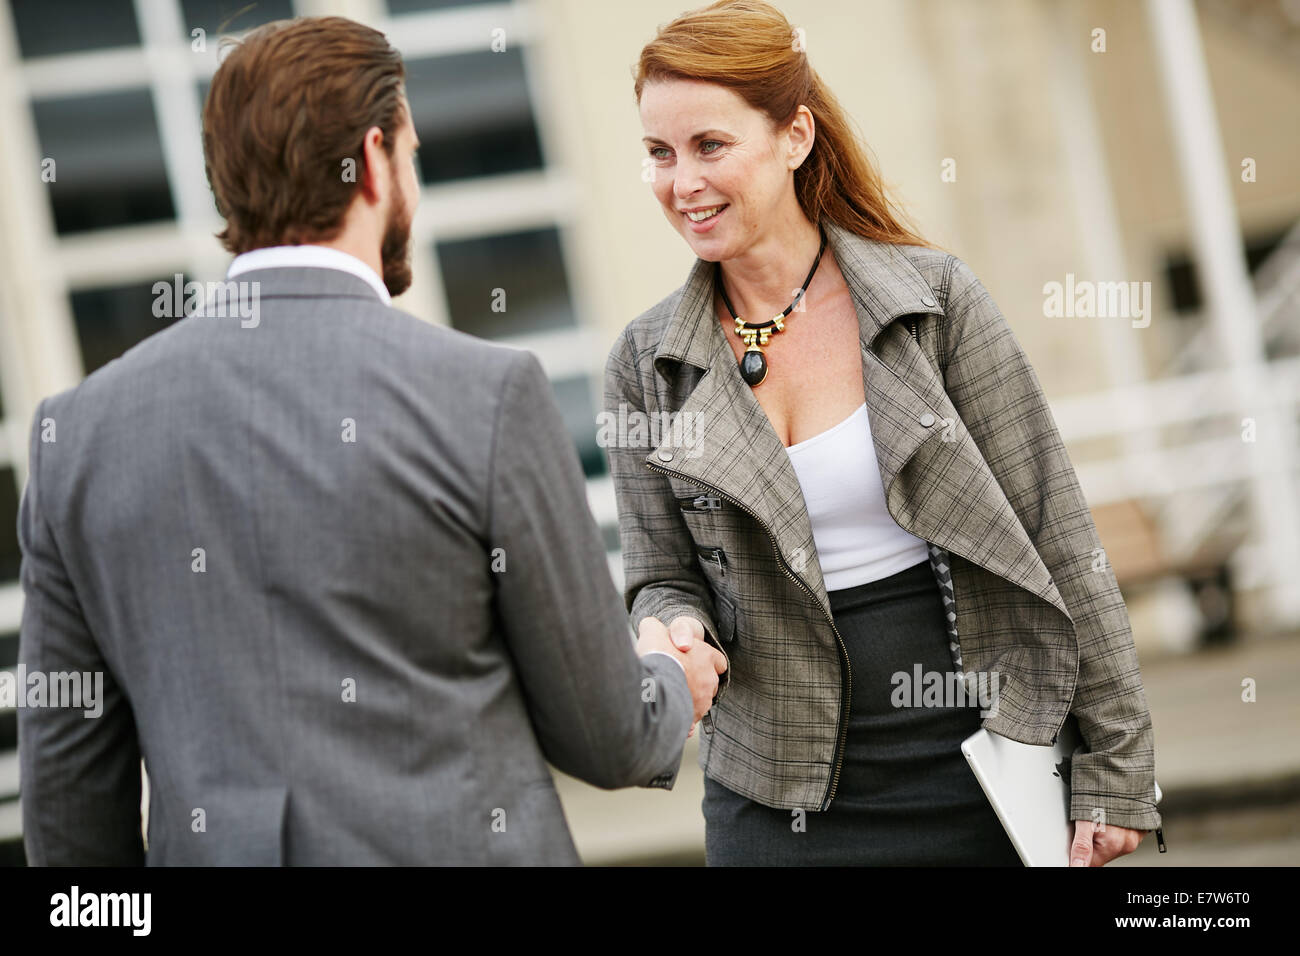 Two business people greeting each other Stock Photo